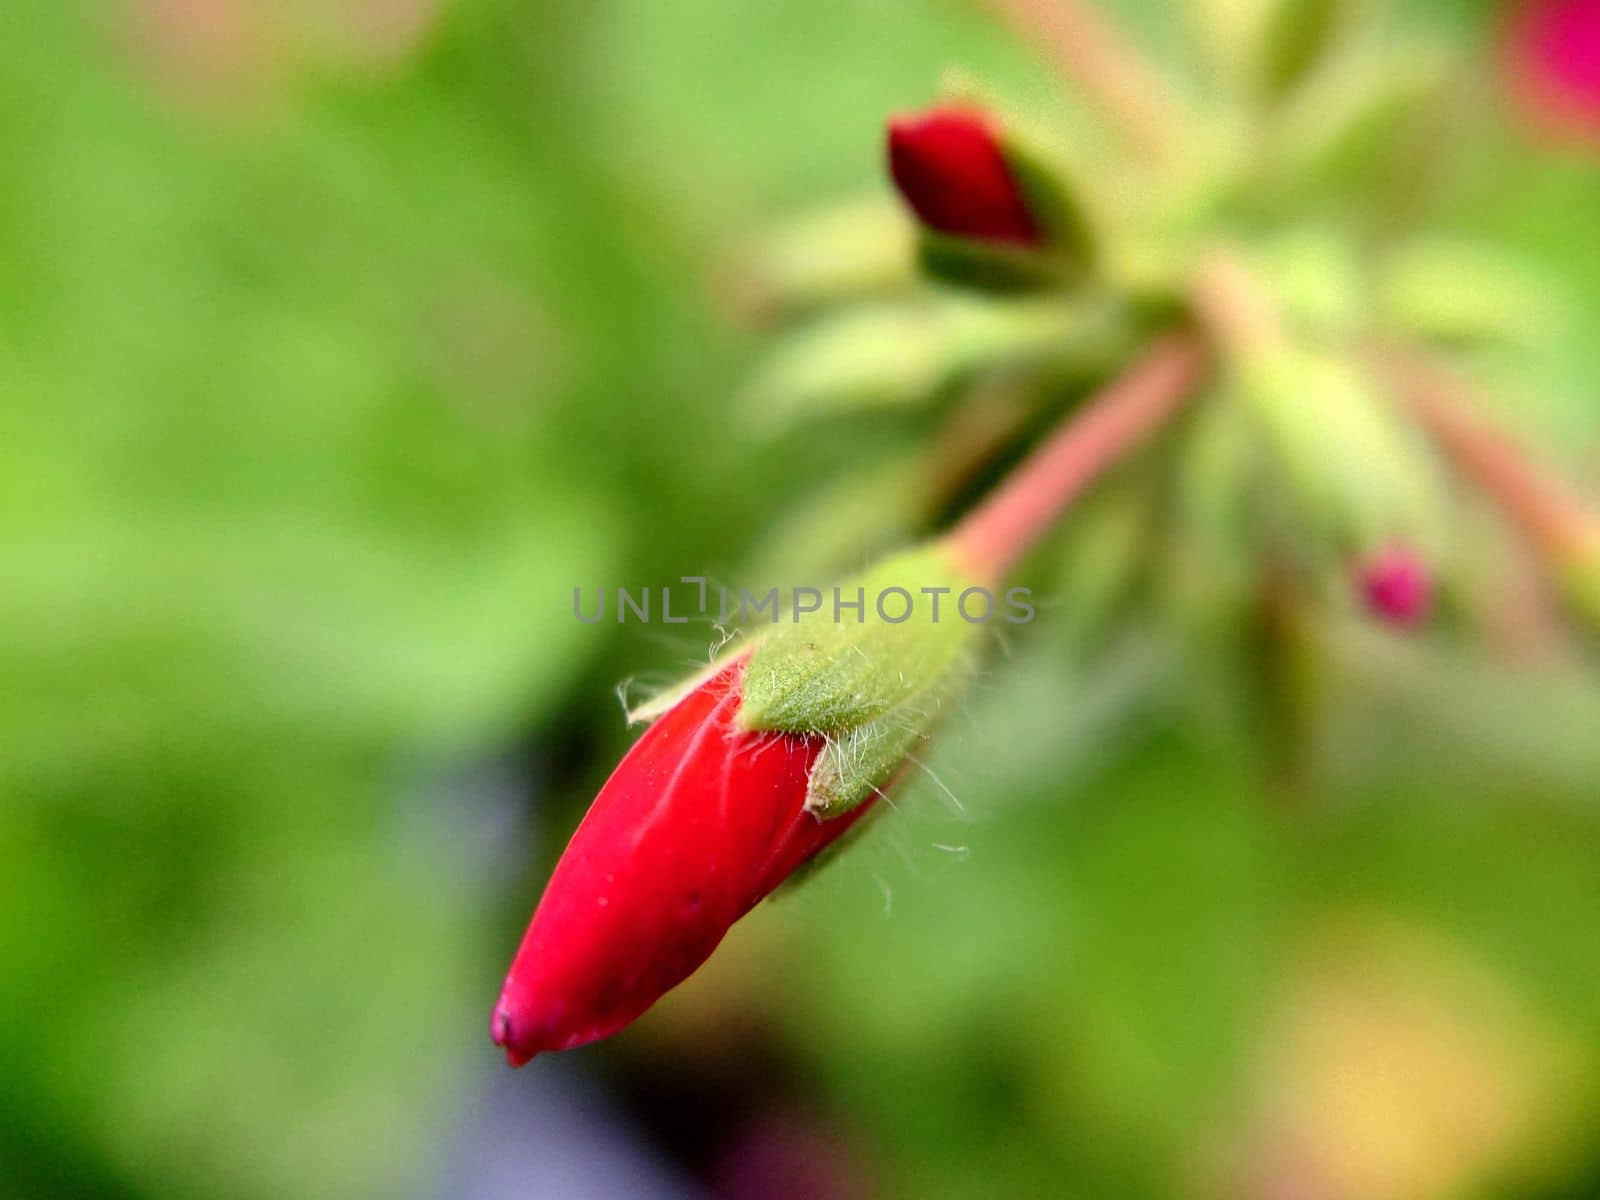 Pointed unopened buds of red color on a blurred grassy background.Macrophotography.Texture or background.Selective focus.